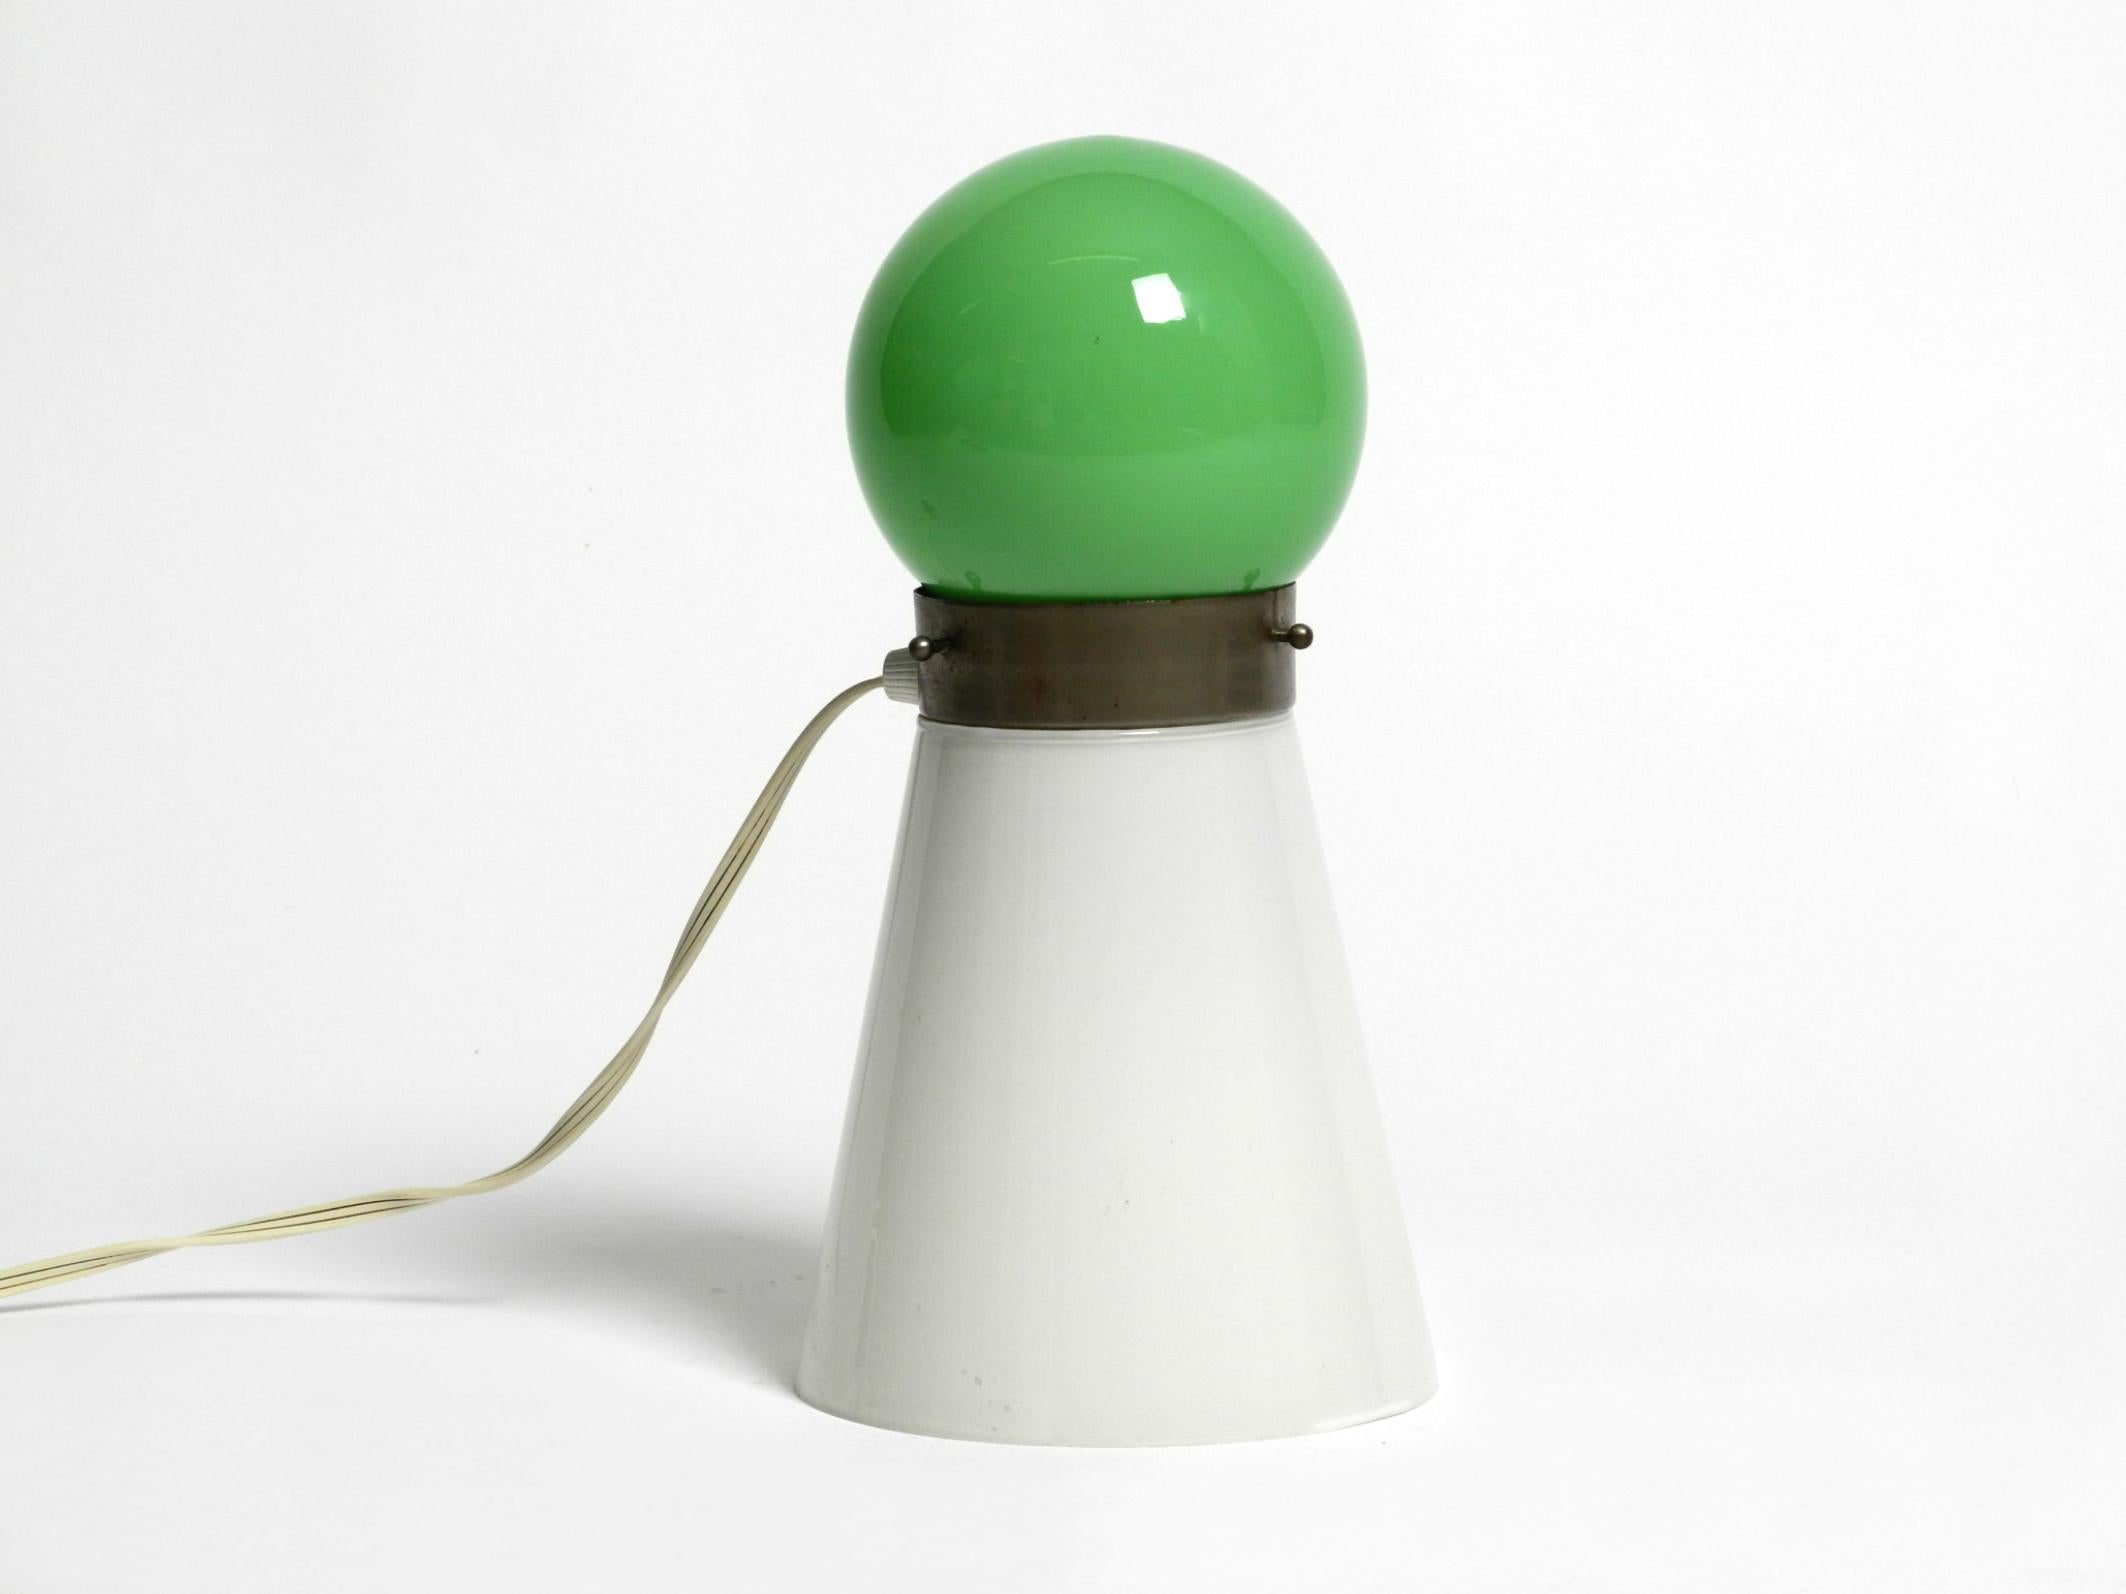 Beautiful original 1960s Italian table lamp made of green and white Murano glass. 
The shape is a like a cone or reminds of a game piece.
Great Mid Century design in very good vintage condition.
Two original E14 sockets. 100% original condition and